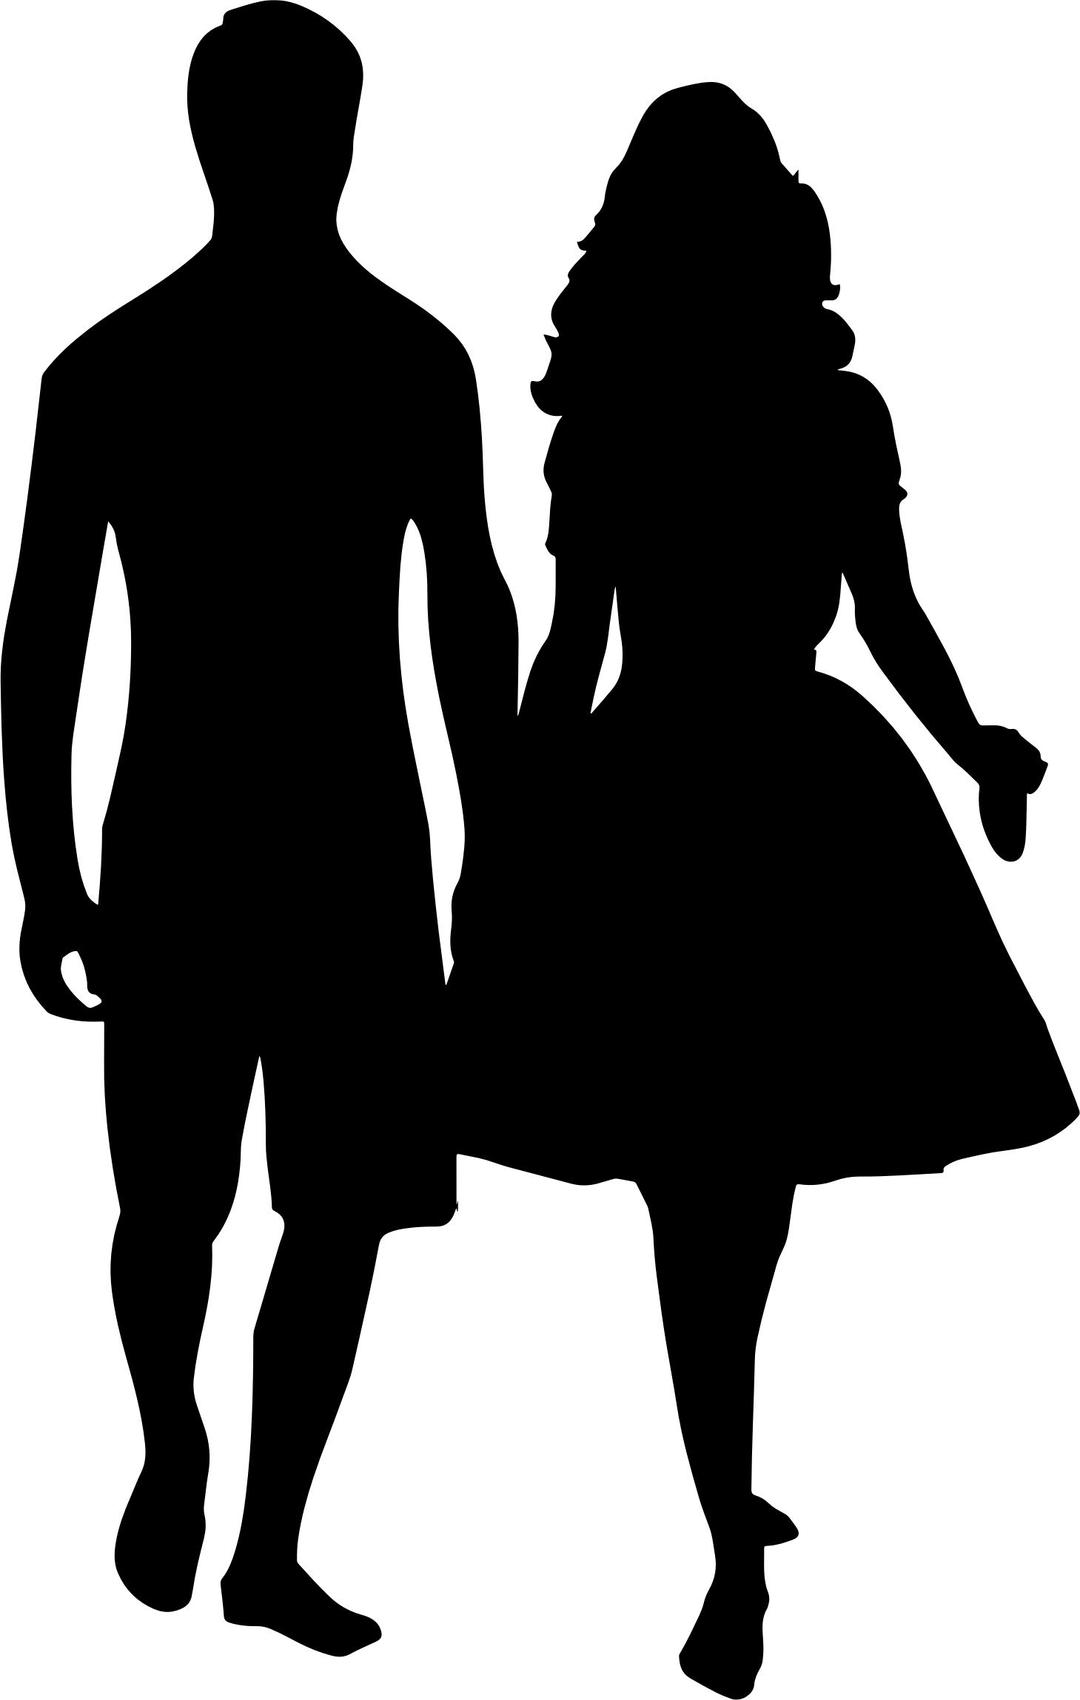 Couple Holding Hands Silhouette png transparent